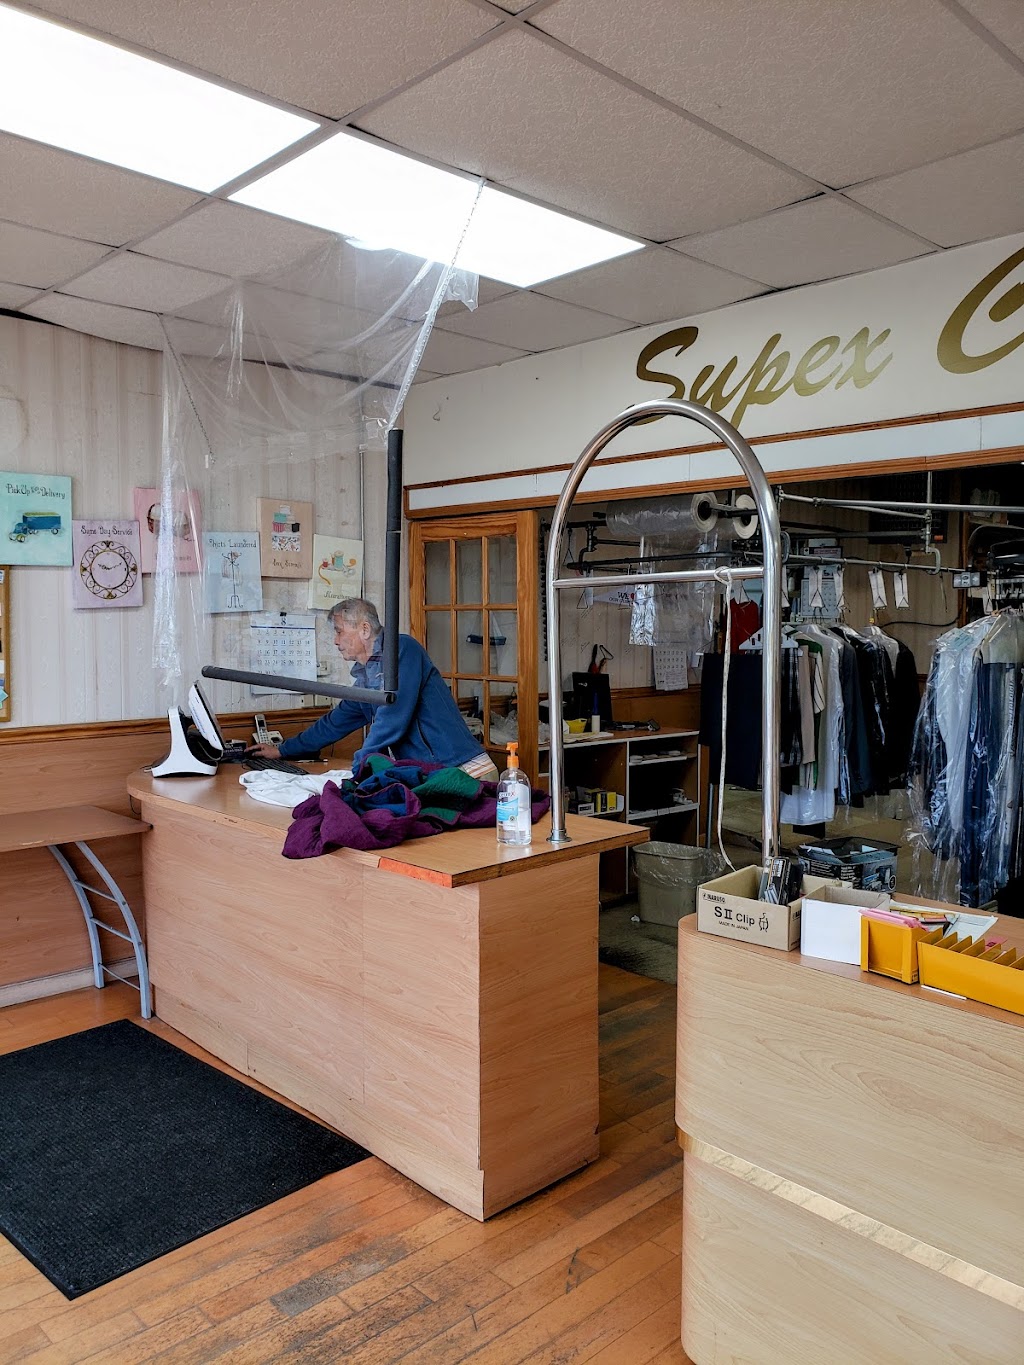 Supex Cleaners | 581 New Haven Ave, Milford, CT 06460 | Phone: (203) 882-0100